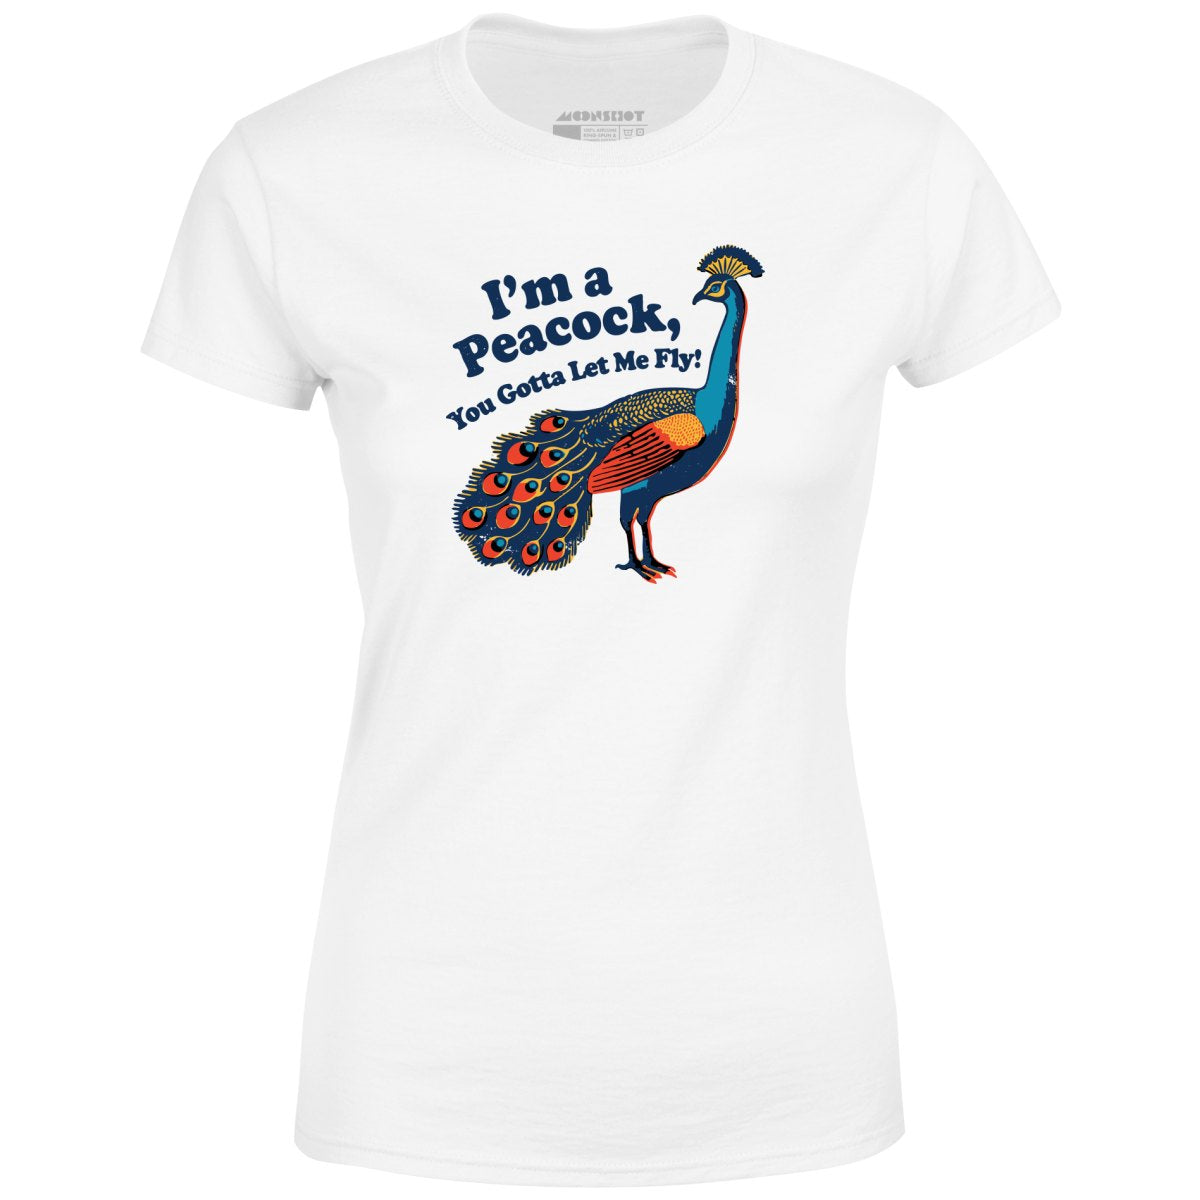 I'm a Peacock You Gotta Let Me Fly - Women's T-Shirt